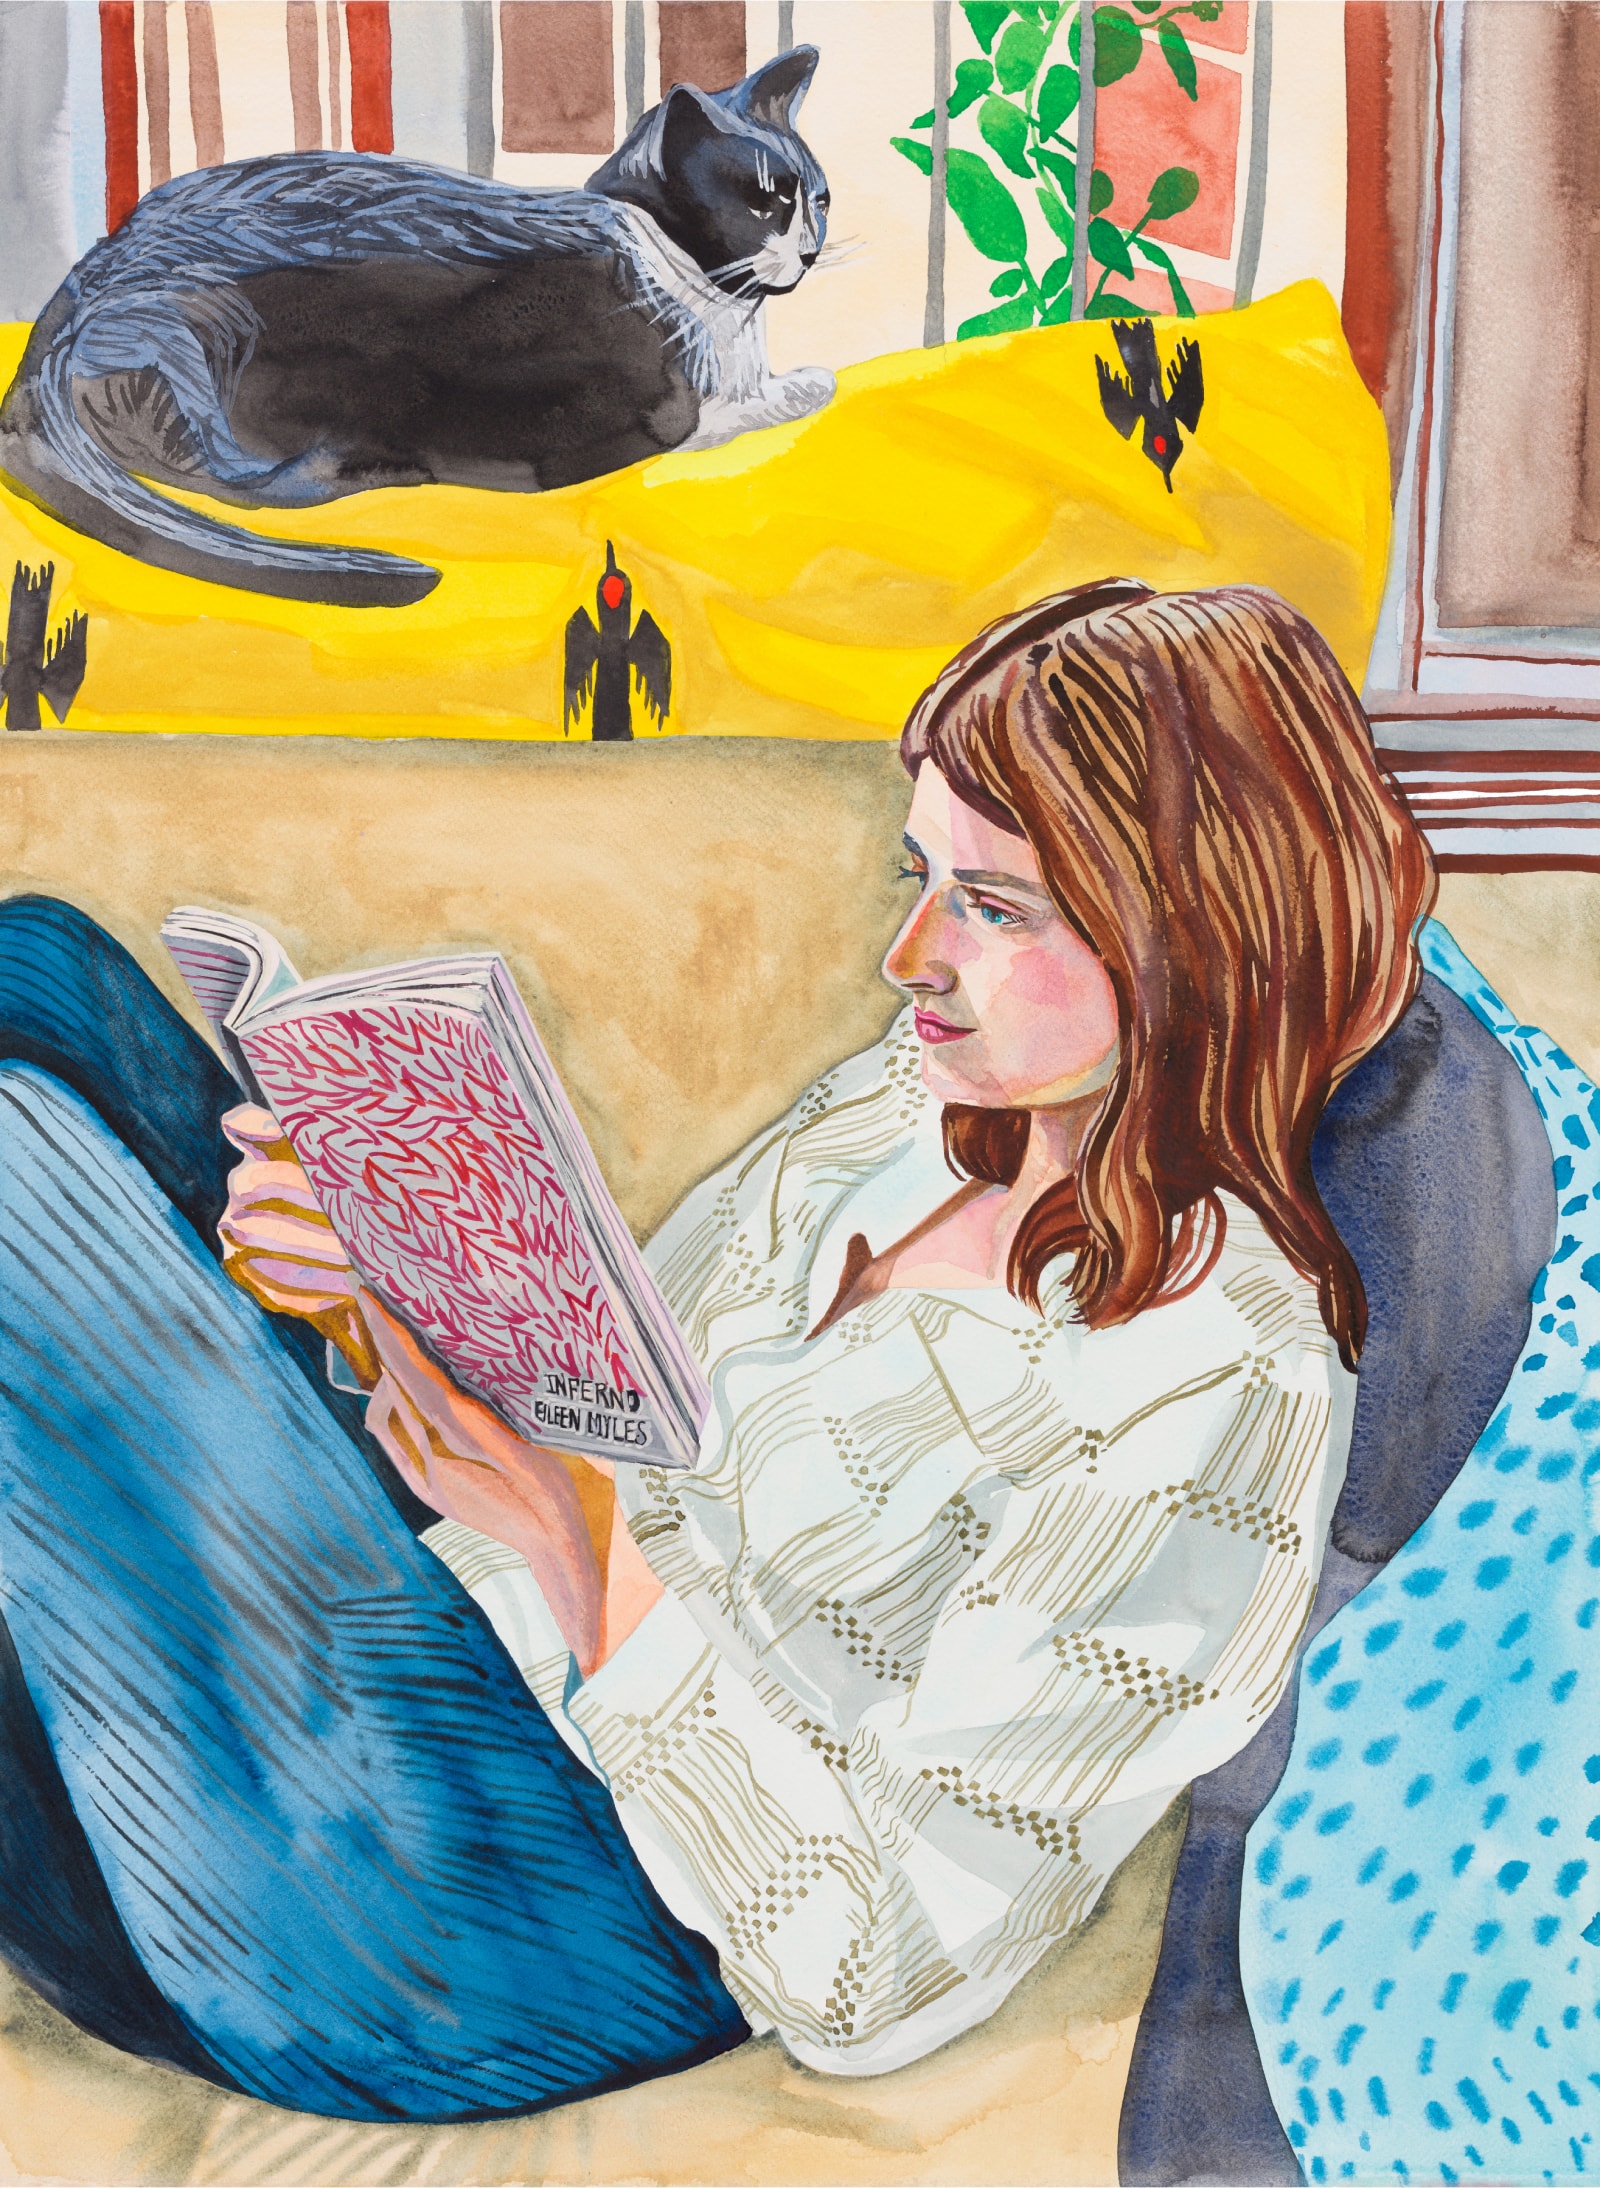 Artwork featuring a woman reading Eileen Mile’s “Inferno” on a couch with a cat seated above